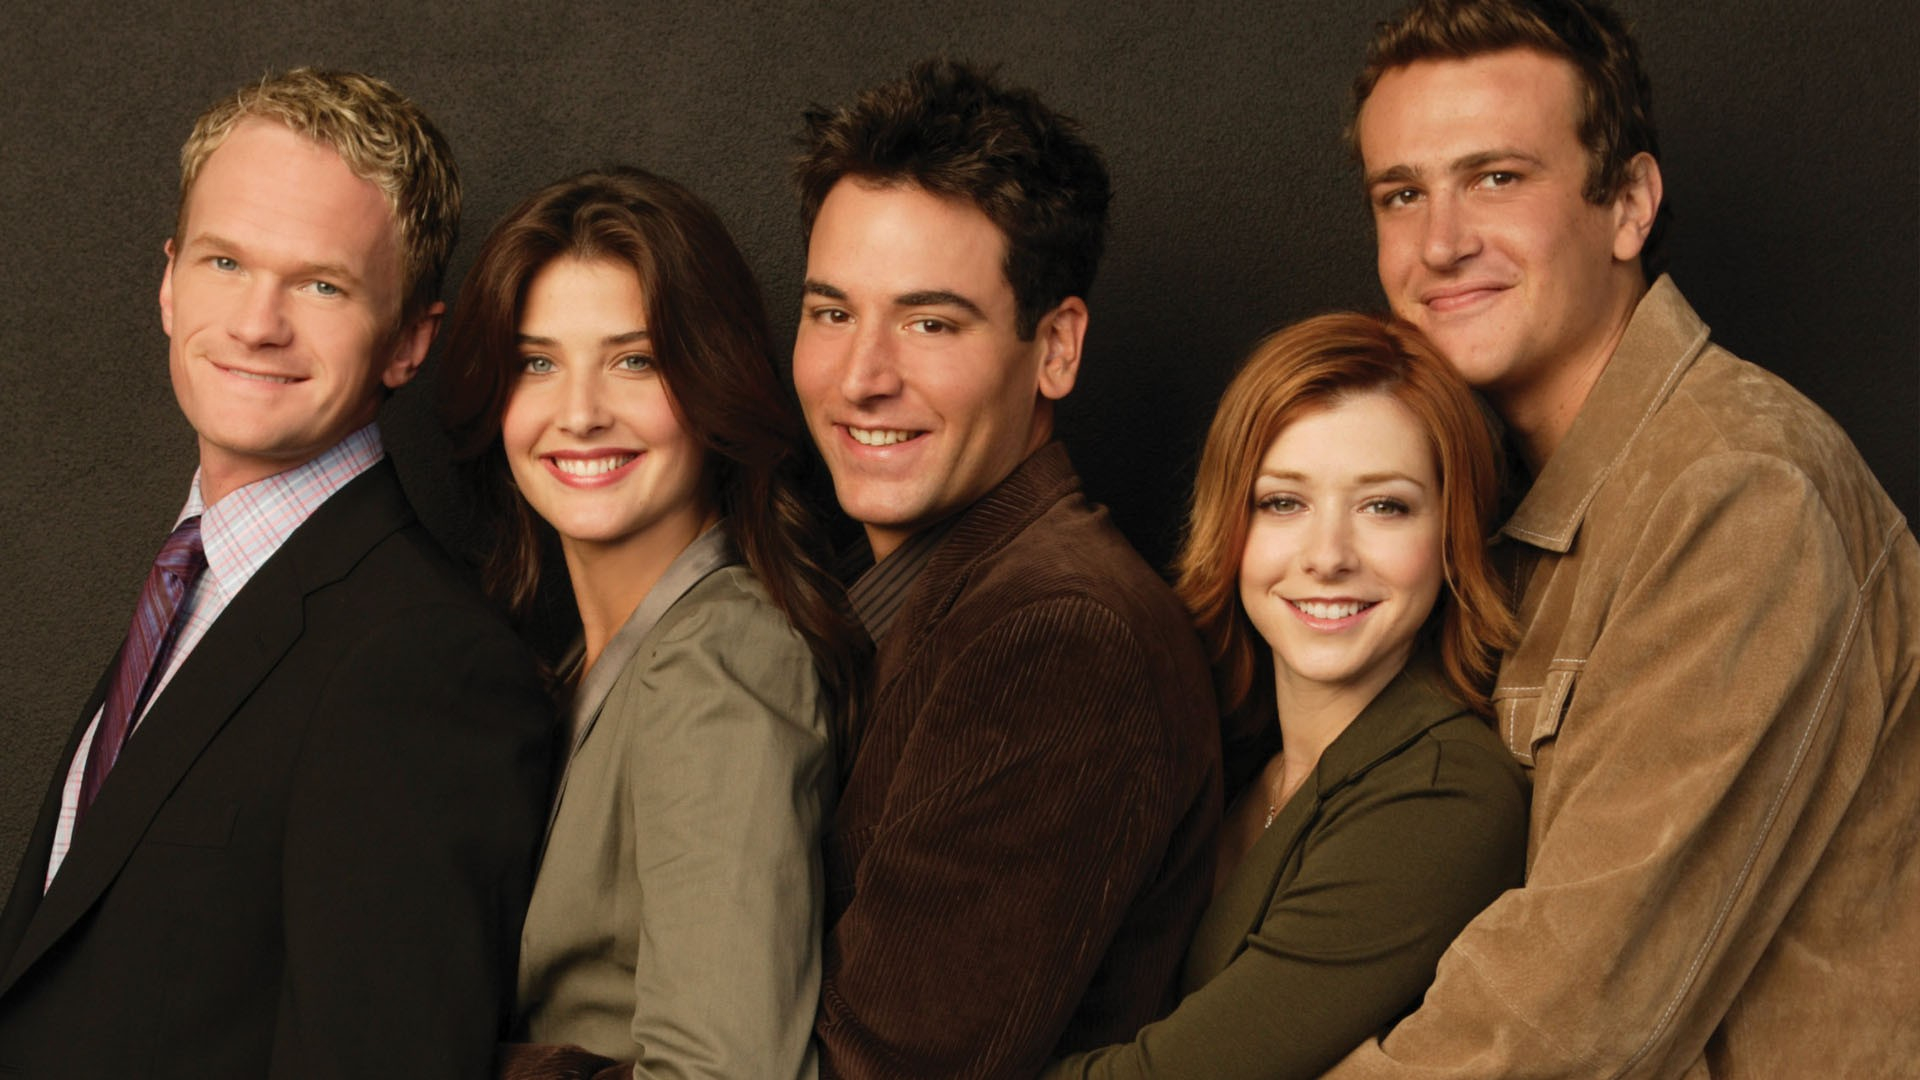 1920x1080 Wallpaper : people, team, Person, audience, Alyson Hannigan, Cobie Smulders, singing, Neil Patrick Harris, How I Met Your Mother, Jason Segel, social group Callvin 258266 HD Wallpapers